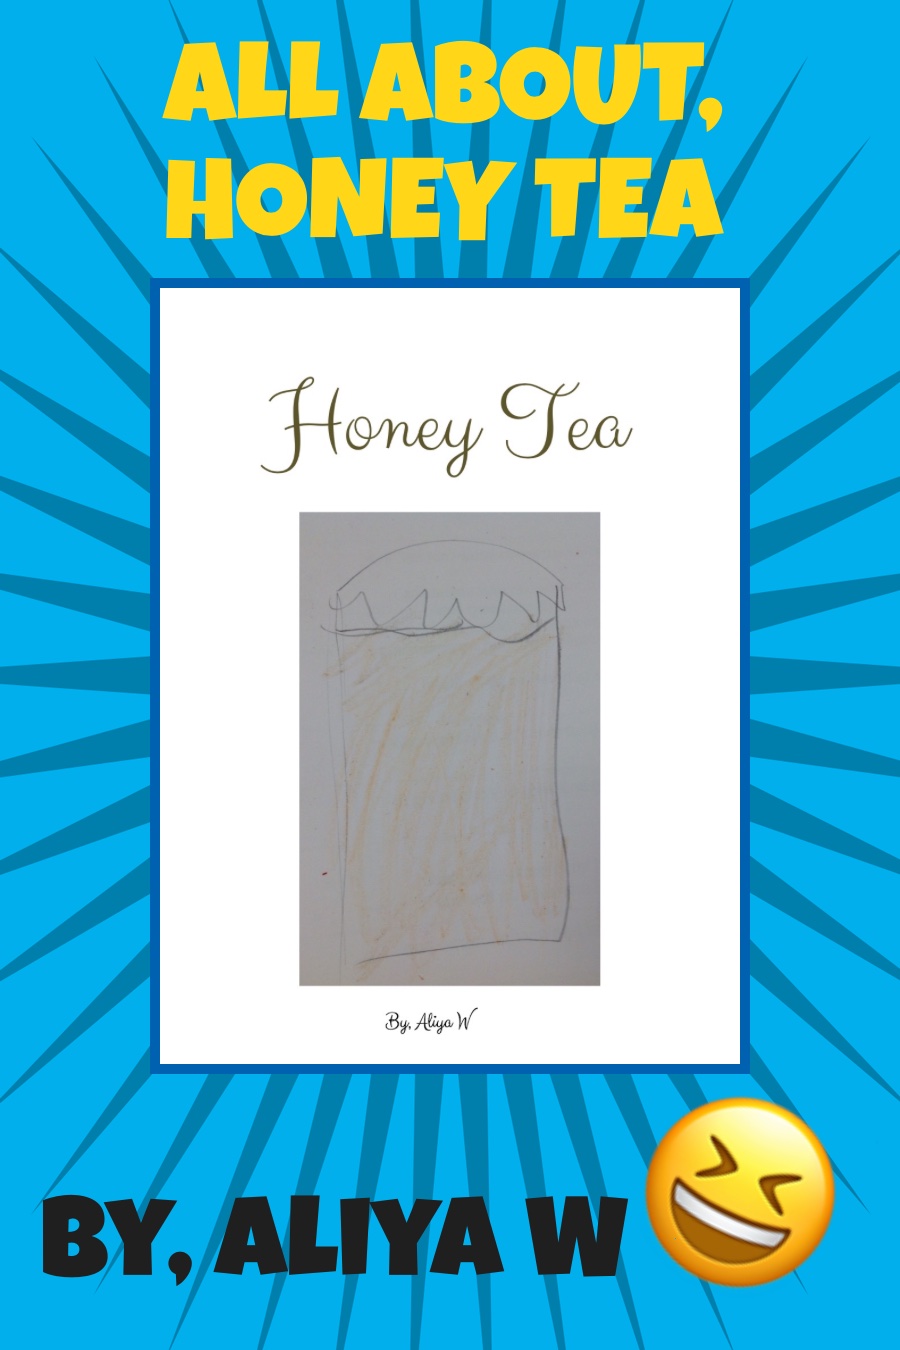 All About Honey Tea by Aliyah W